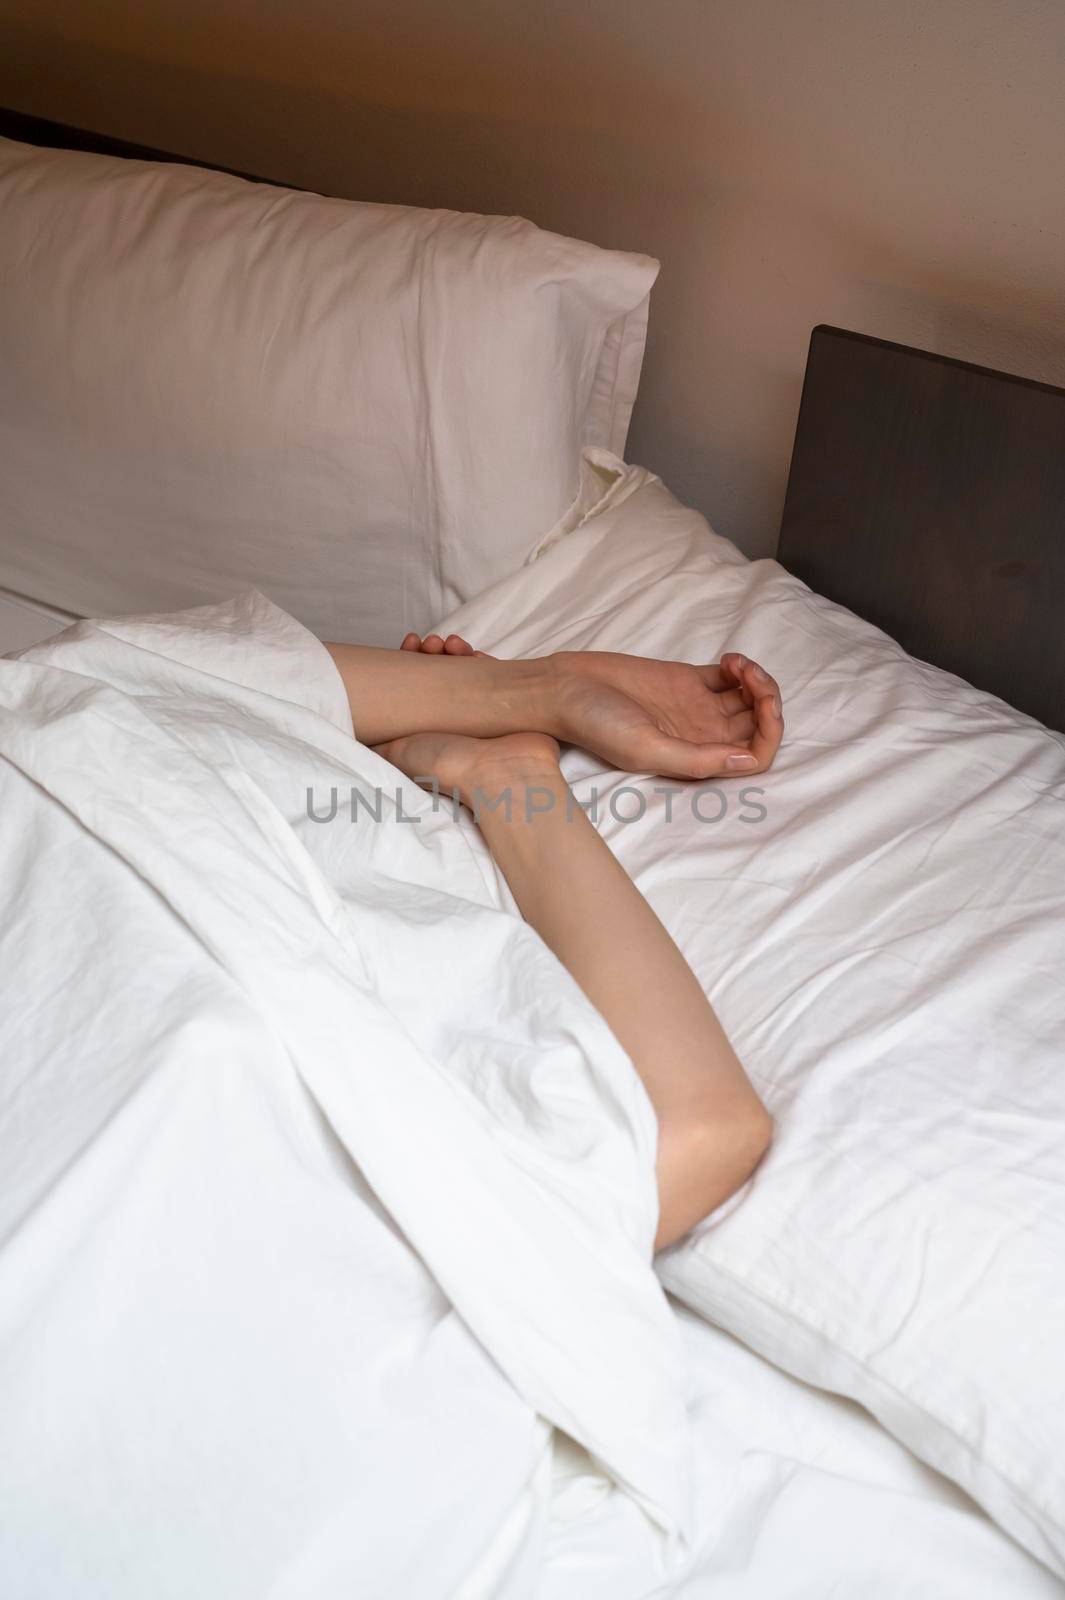 Woman sleeping in the bed under white sheet.